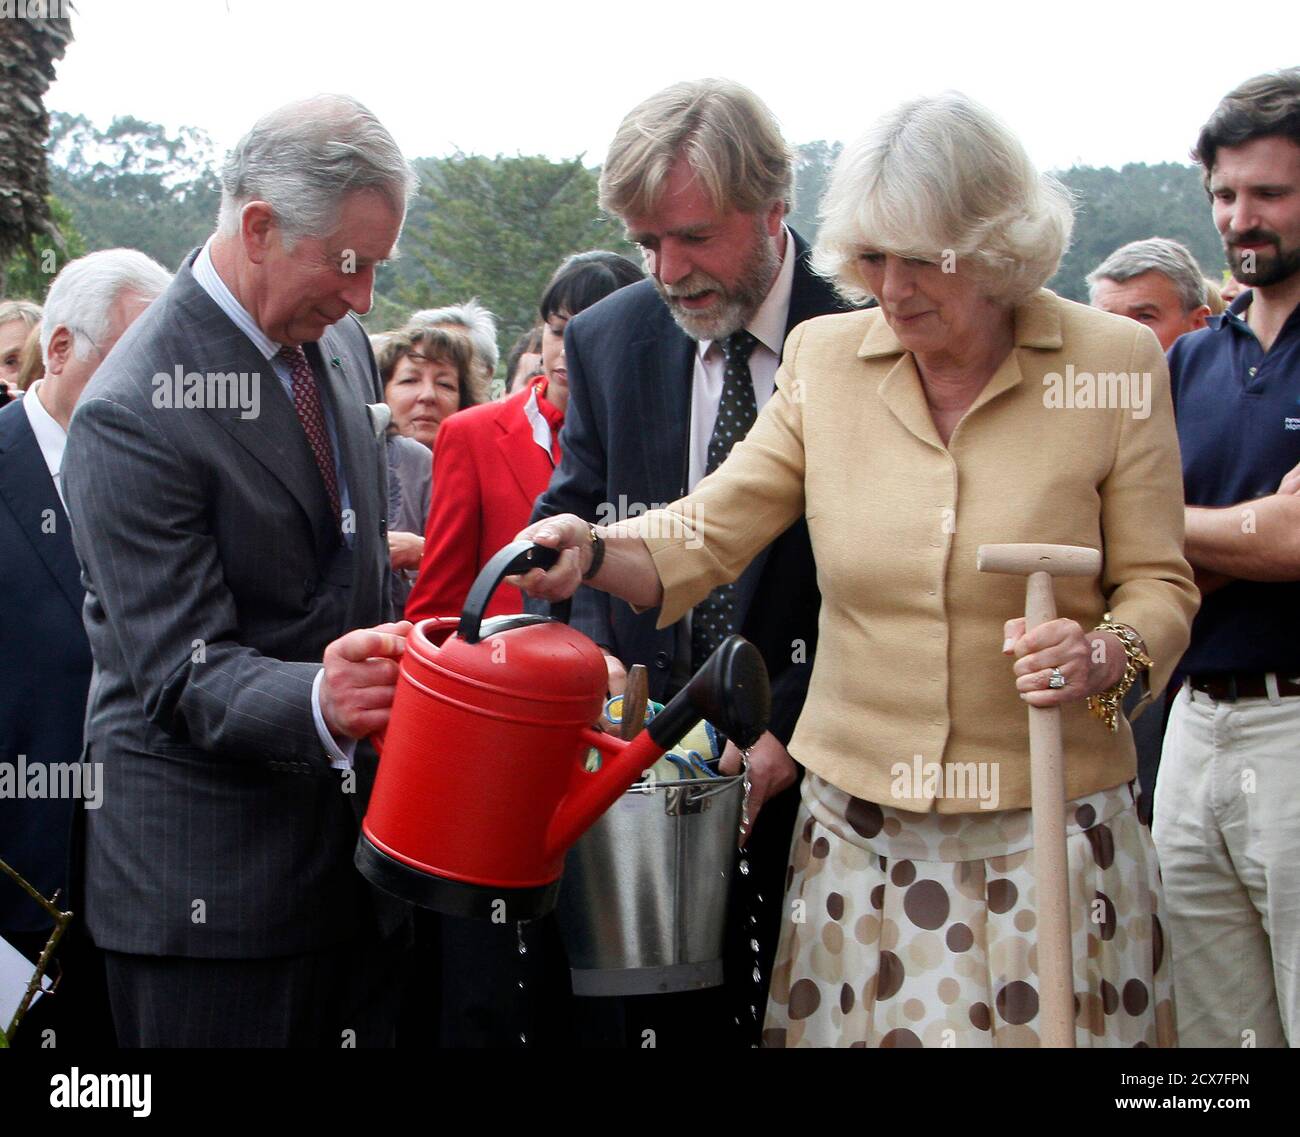 britains-prince-charles-l-and-his-wife-camilla-2nd-r-the-duchess-of-cornwall-plant-a-rose-at-the-monserrate-palace-in-sintra-march-29-2011-prince-charles-and-his-wife-camilla-the-duchess-of-cornwall-are-on-a-three-day-official-visit-to-portugal-reuters-hugo-correia-portugal-tags-politics-royals-2cx7fpn.jpg